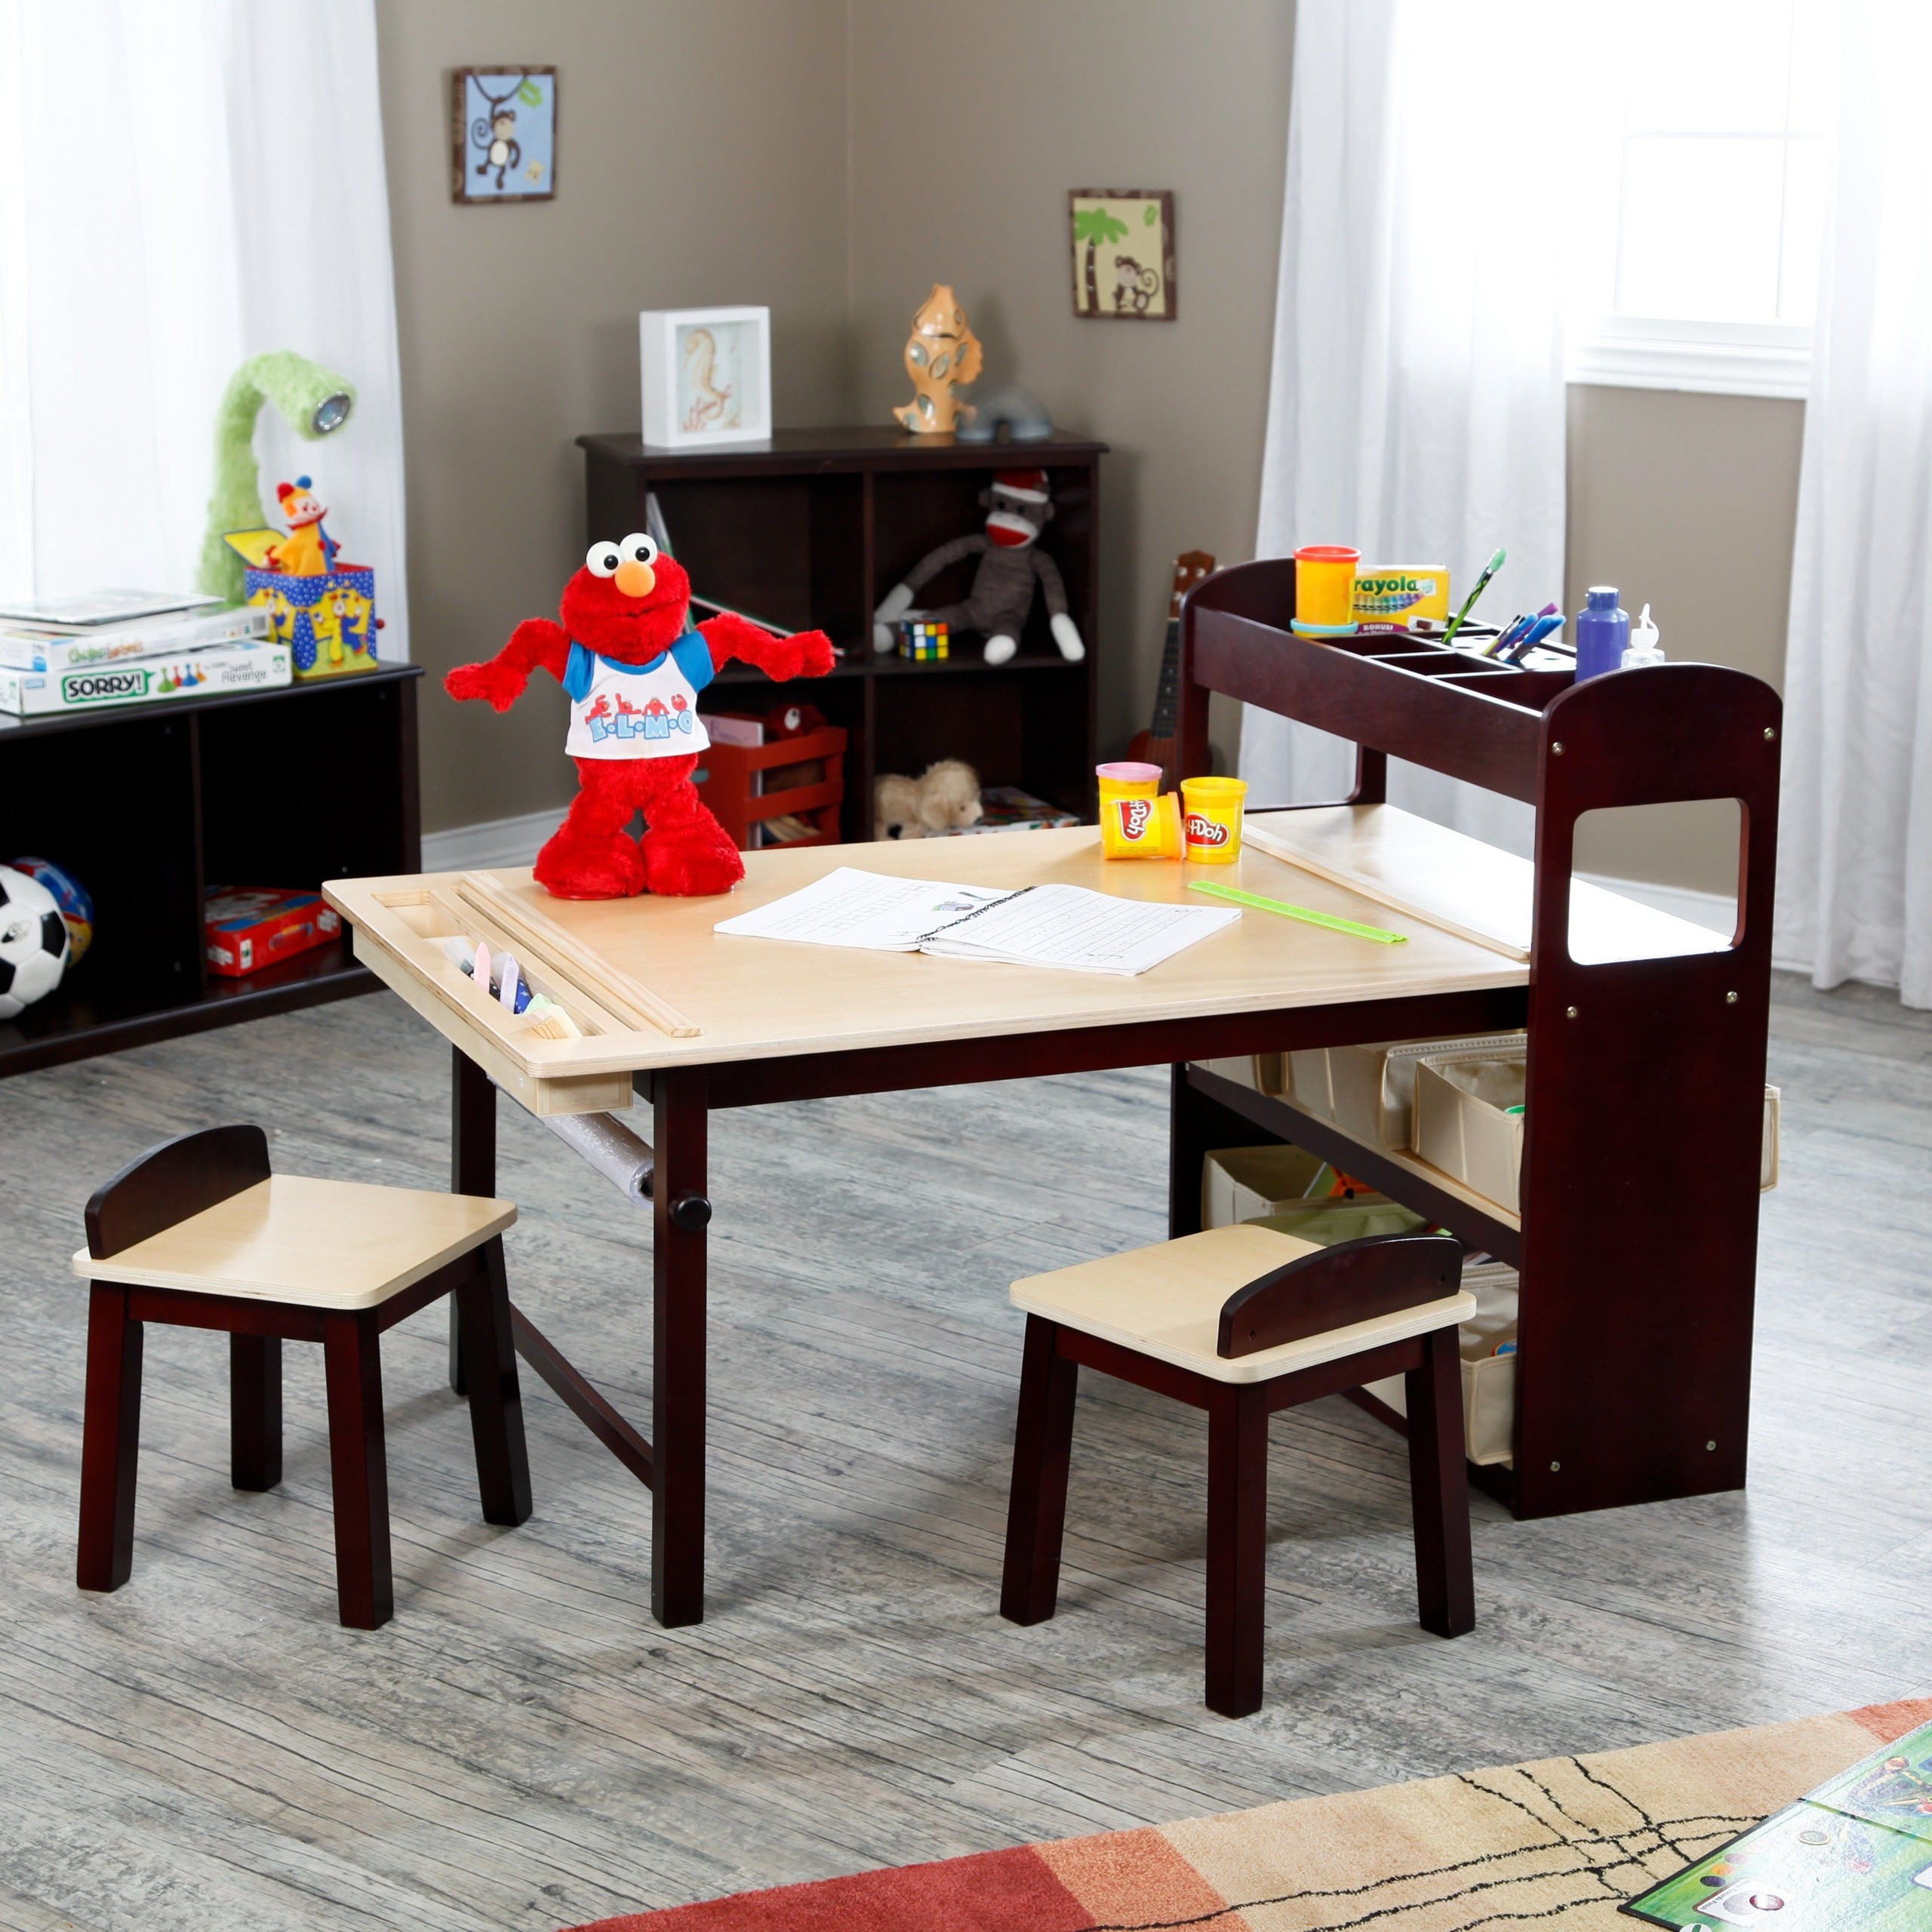 Guidecraft Guidecraft Kids Deluxe Art Center, Wood, Table 21H in.